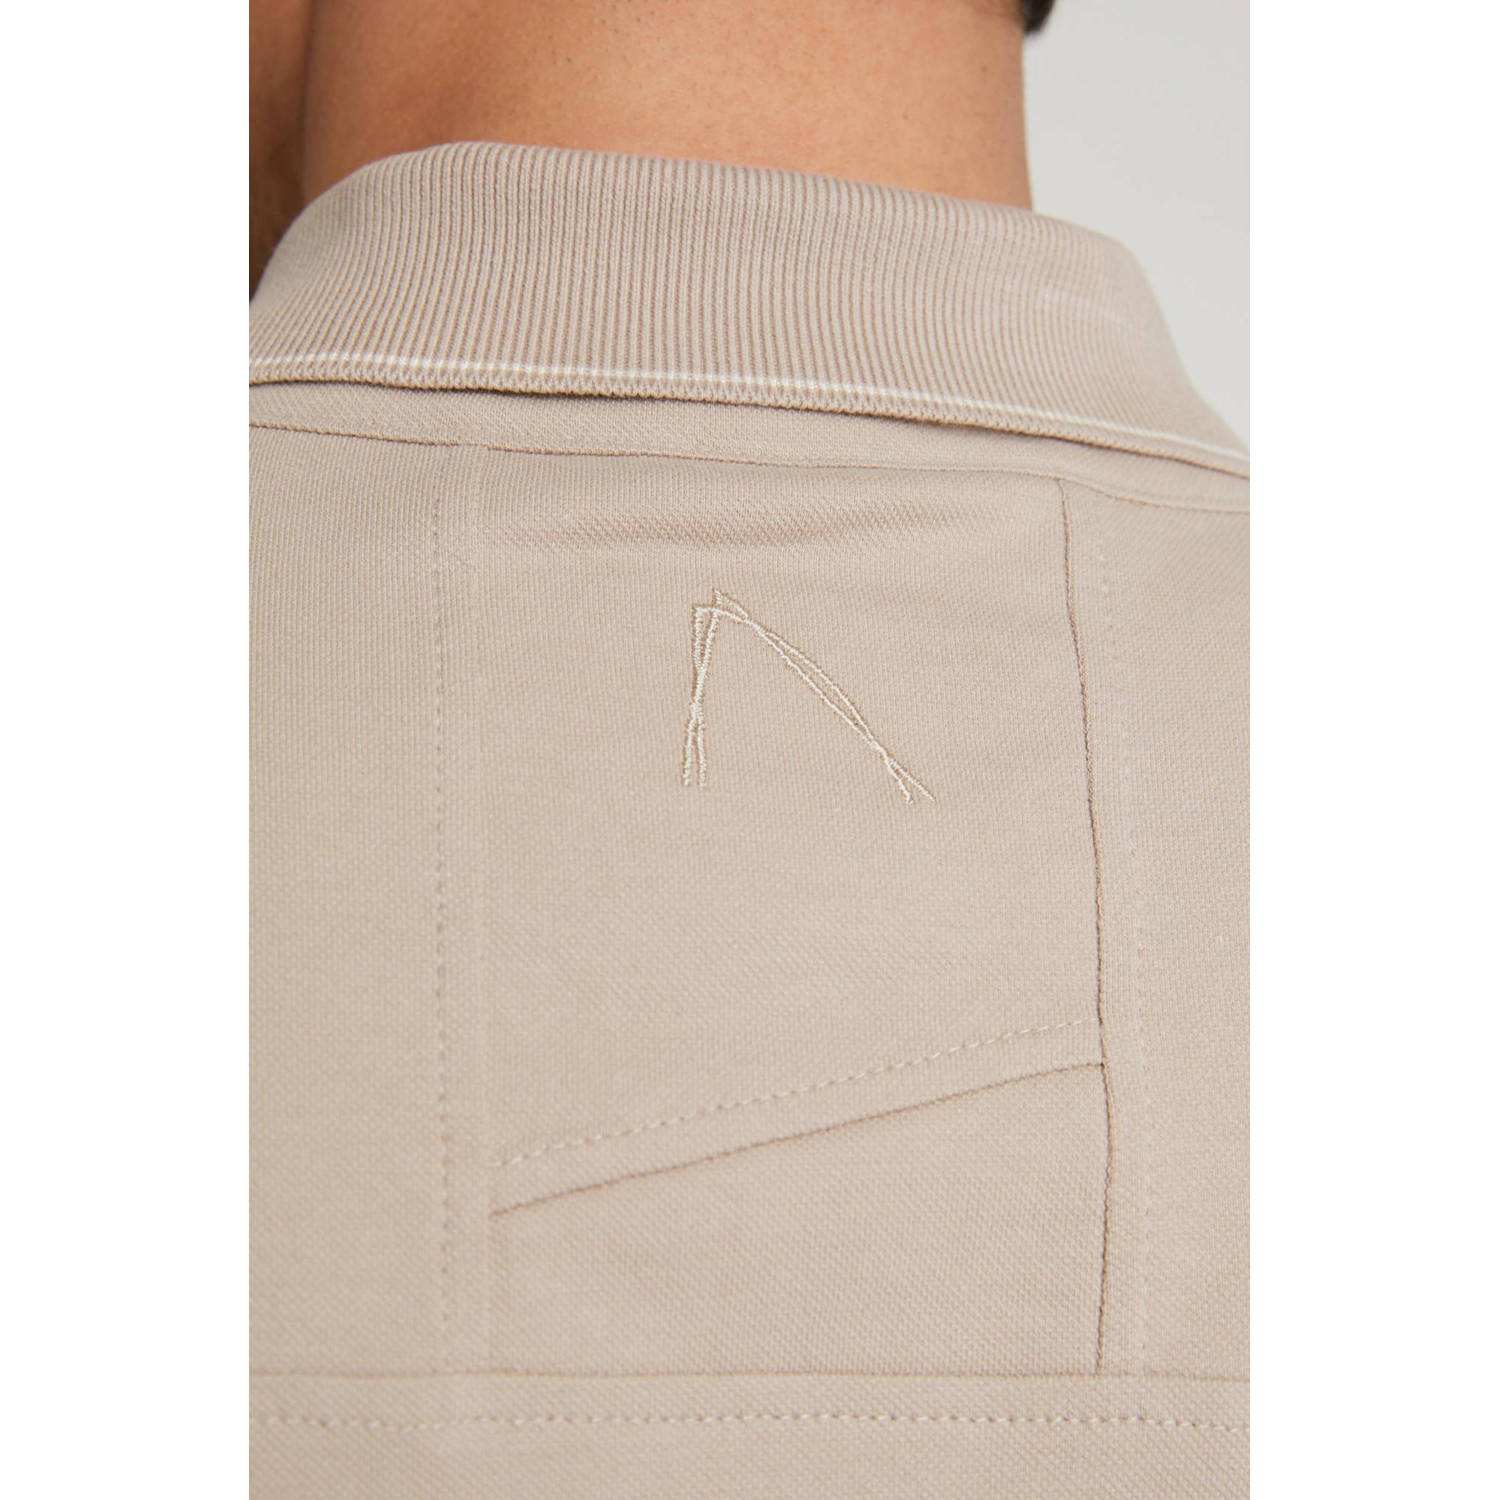 CHASIN' slim fit polo JAY met logo taupe